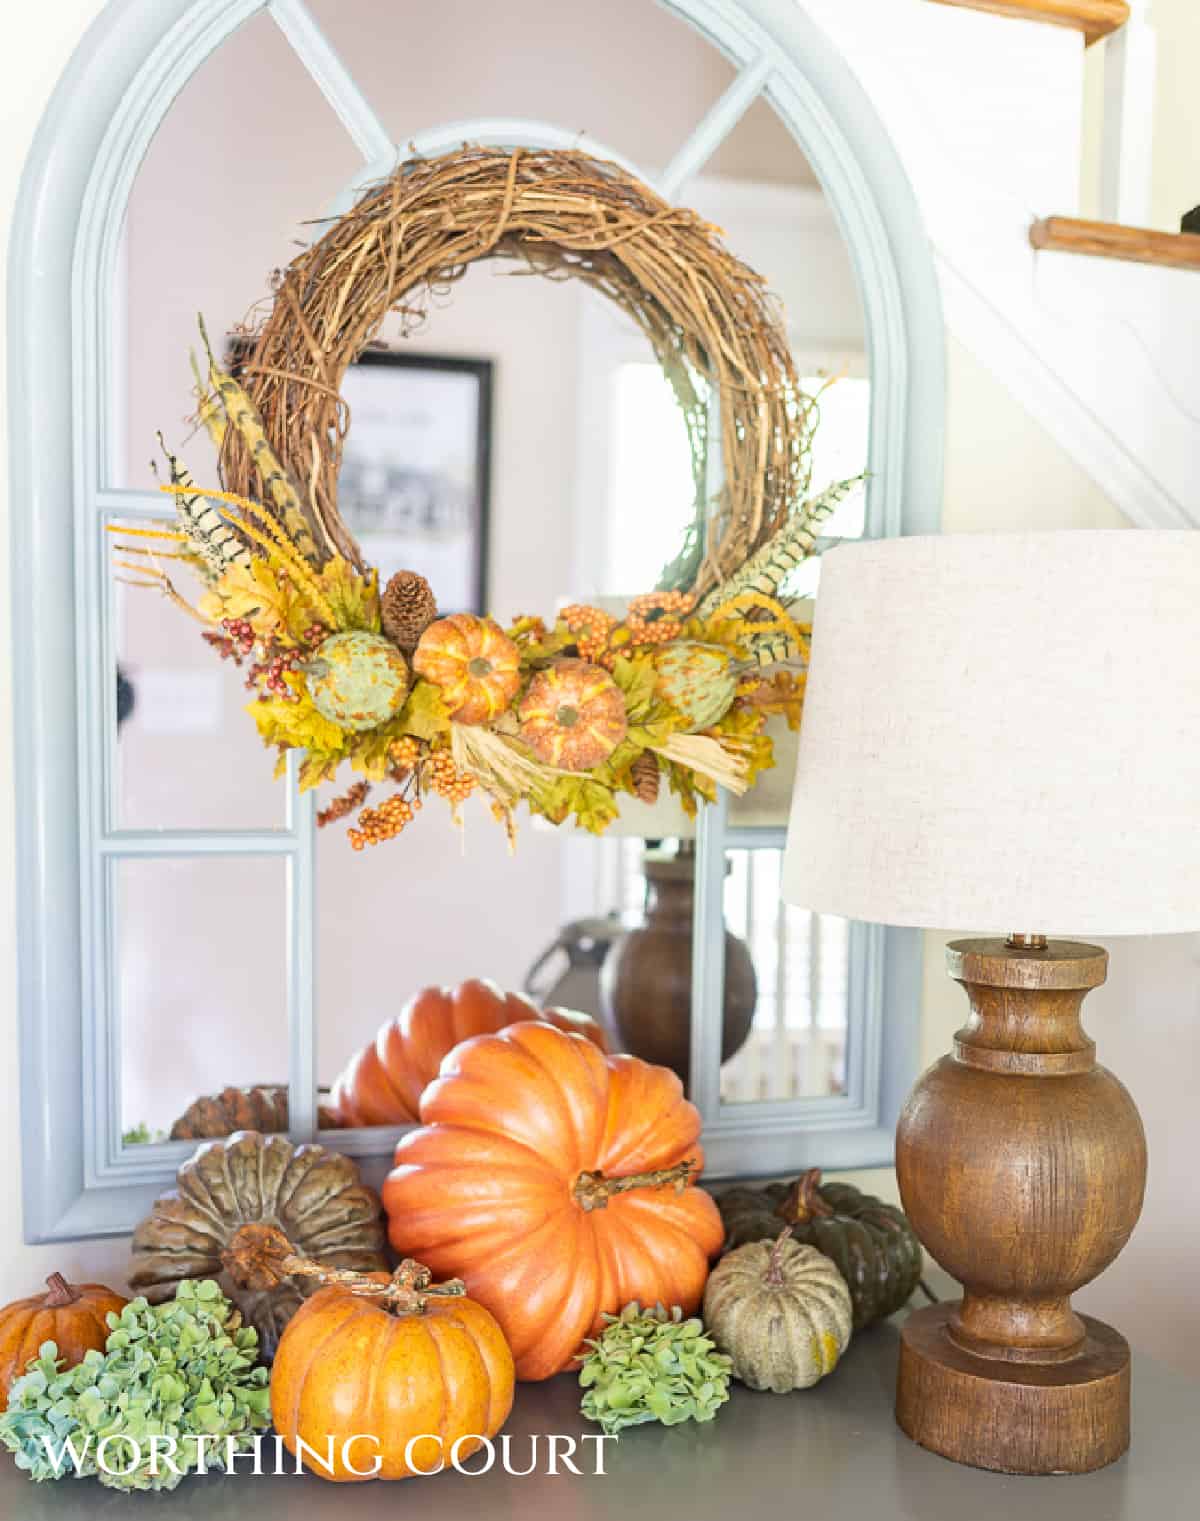 foyer table with diy fall wreath and assortment of pumpkins